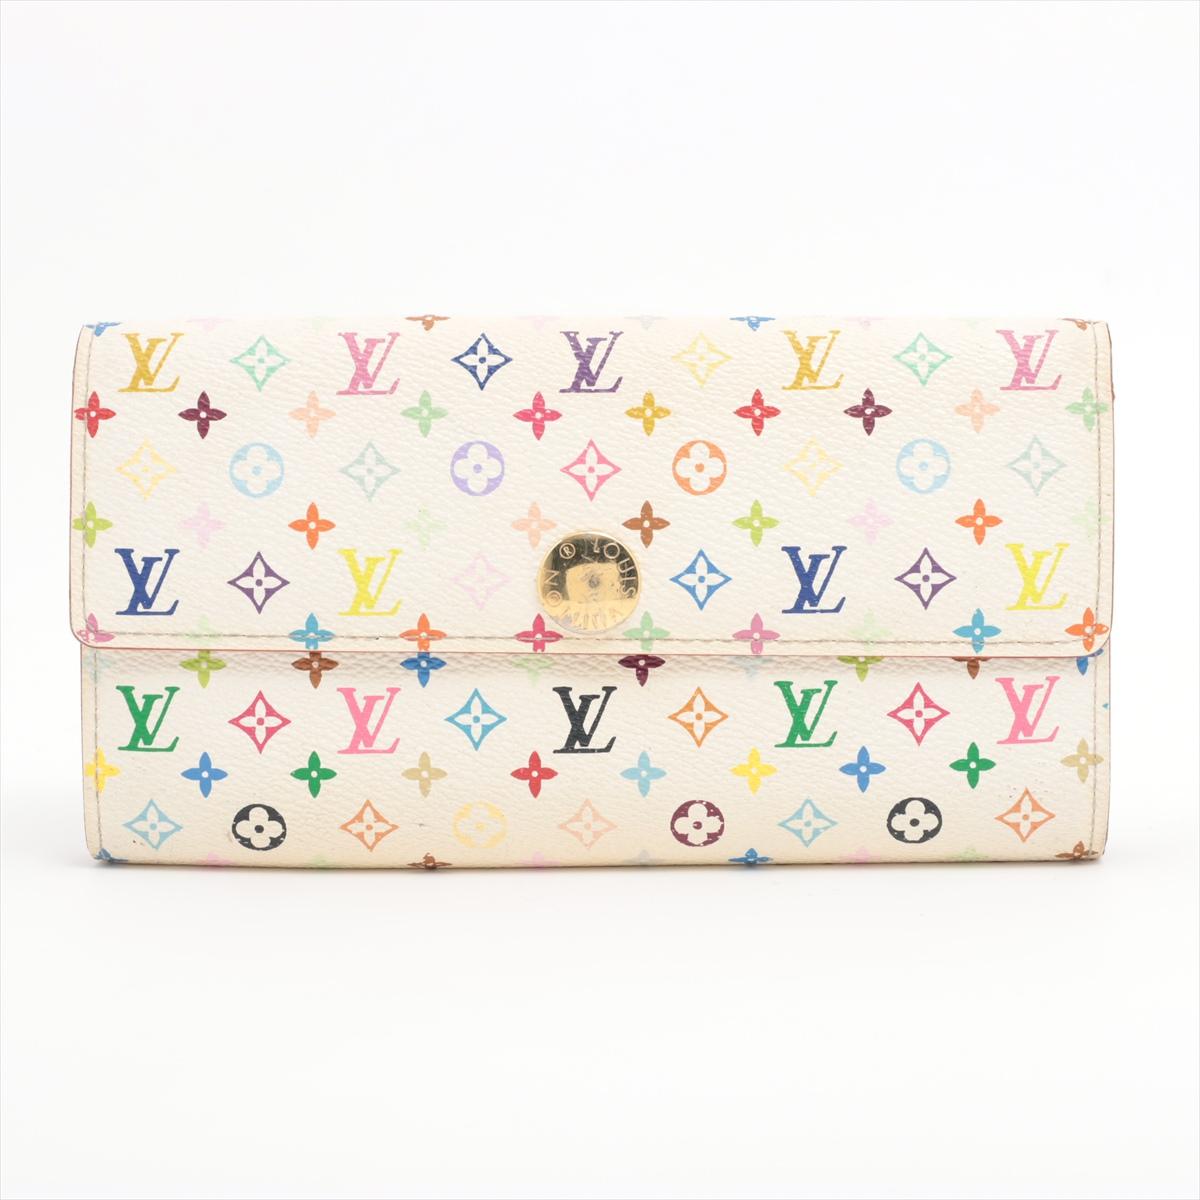 The Louis Vuitton Multicolor Sarah Long Wallet in Beige a chic and versatile accessory that effortlessly combines modern aesthetics with the brand's iconic flair. Crafted from the signature Multicolor canvas, the wallet features a neutral beige tone